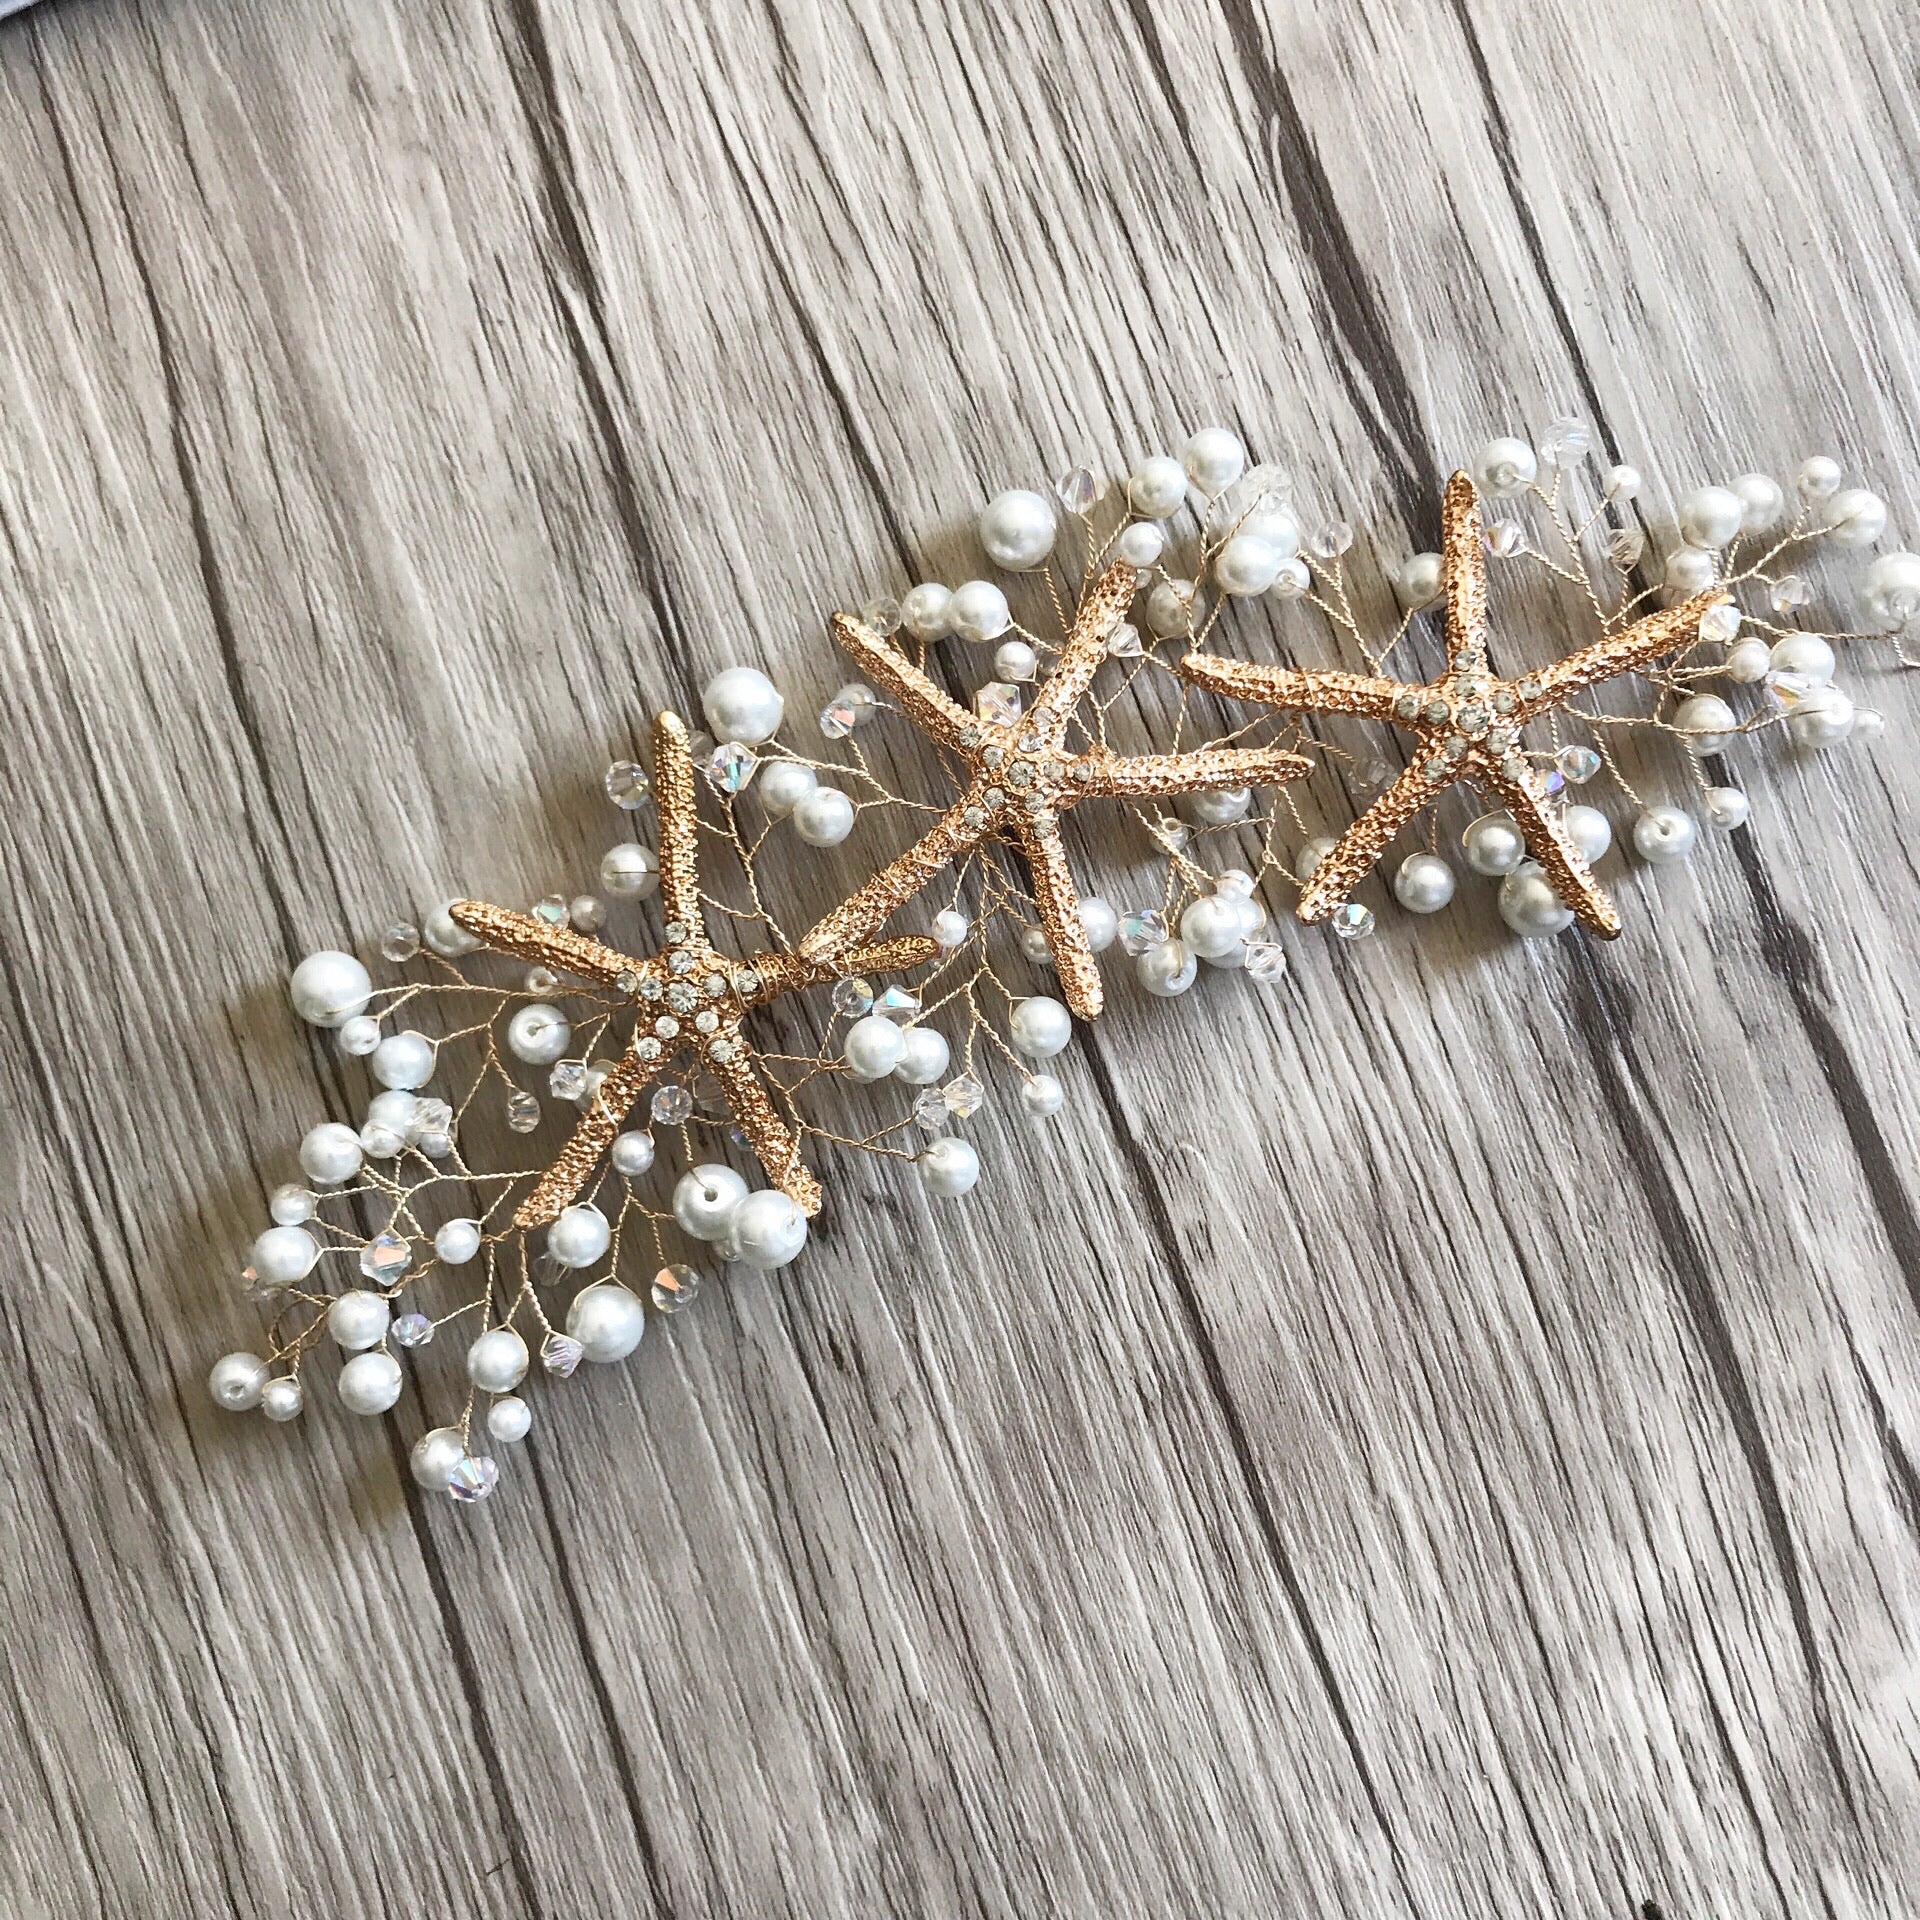 Gold Starfish and Pearl Bridal Hair Vine perfect for beach and tropical brides. Handmade by Wire Princess